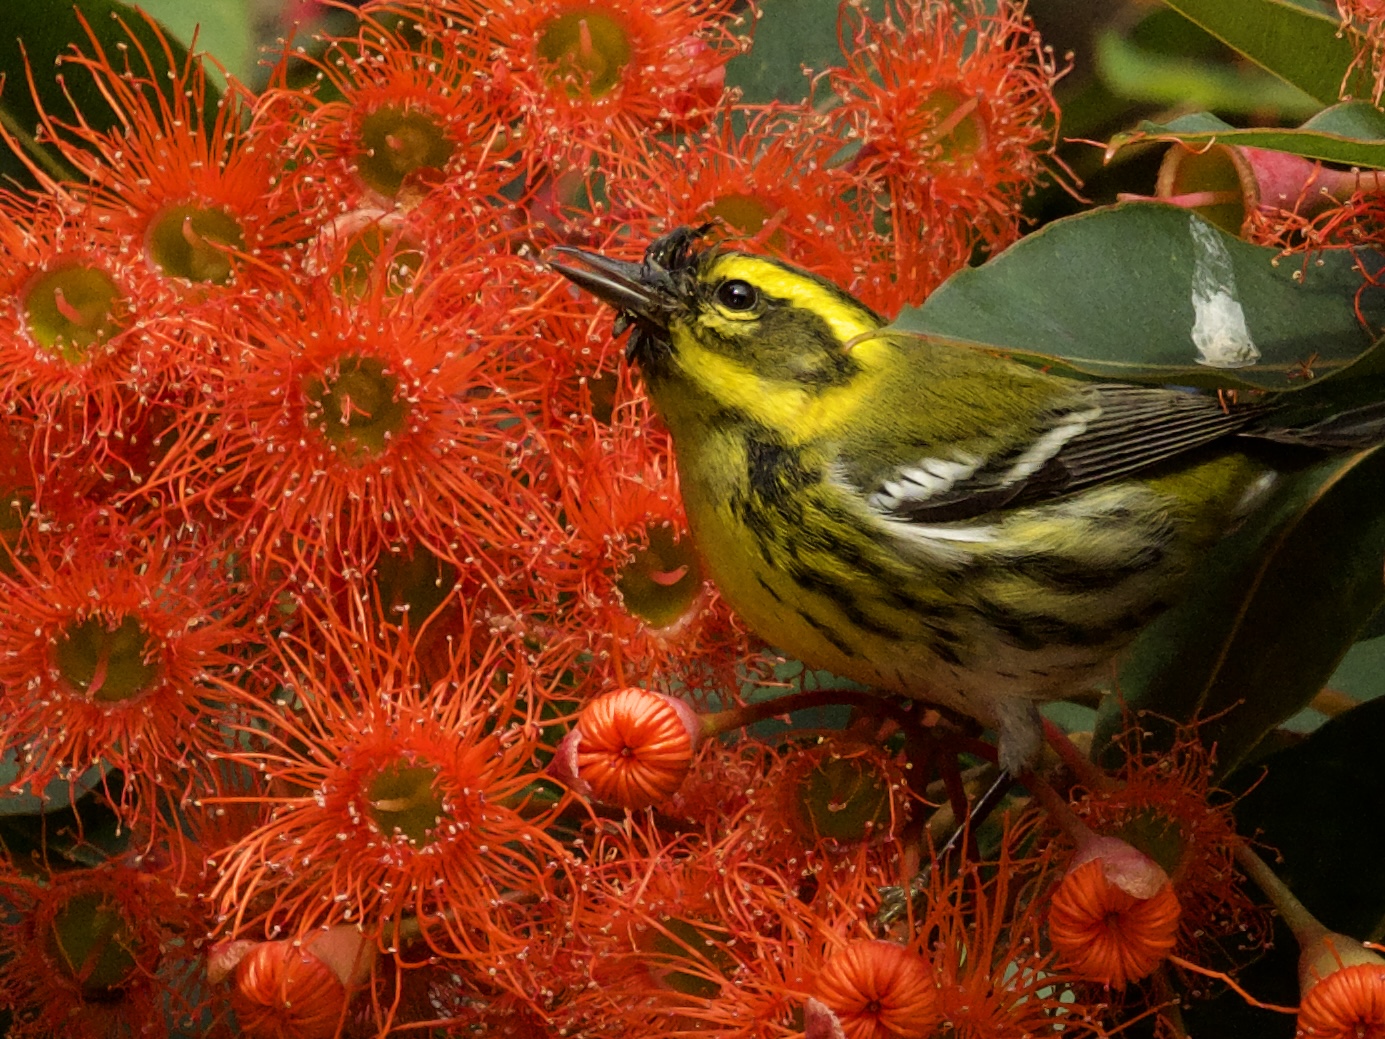 Townsend's Warbler in Corymbia Red Gum Tree San Francisco